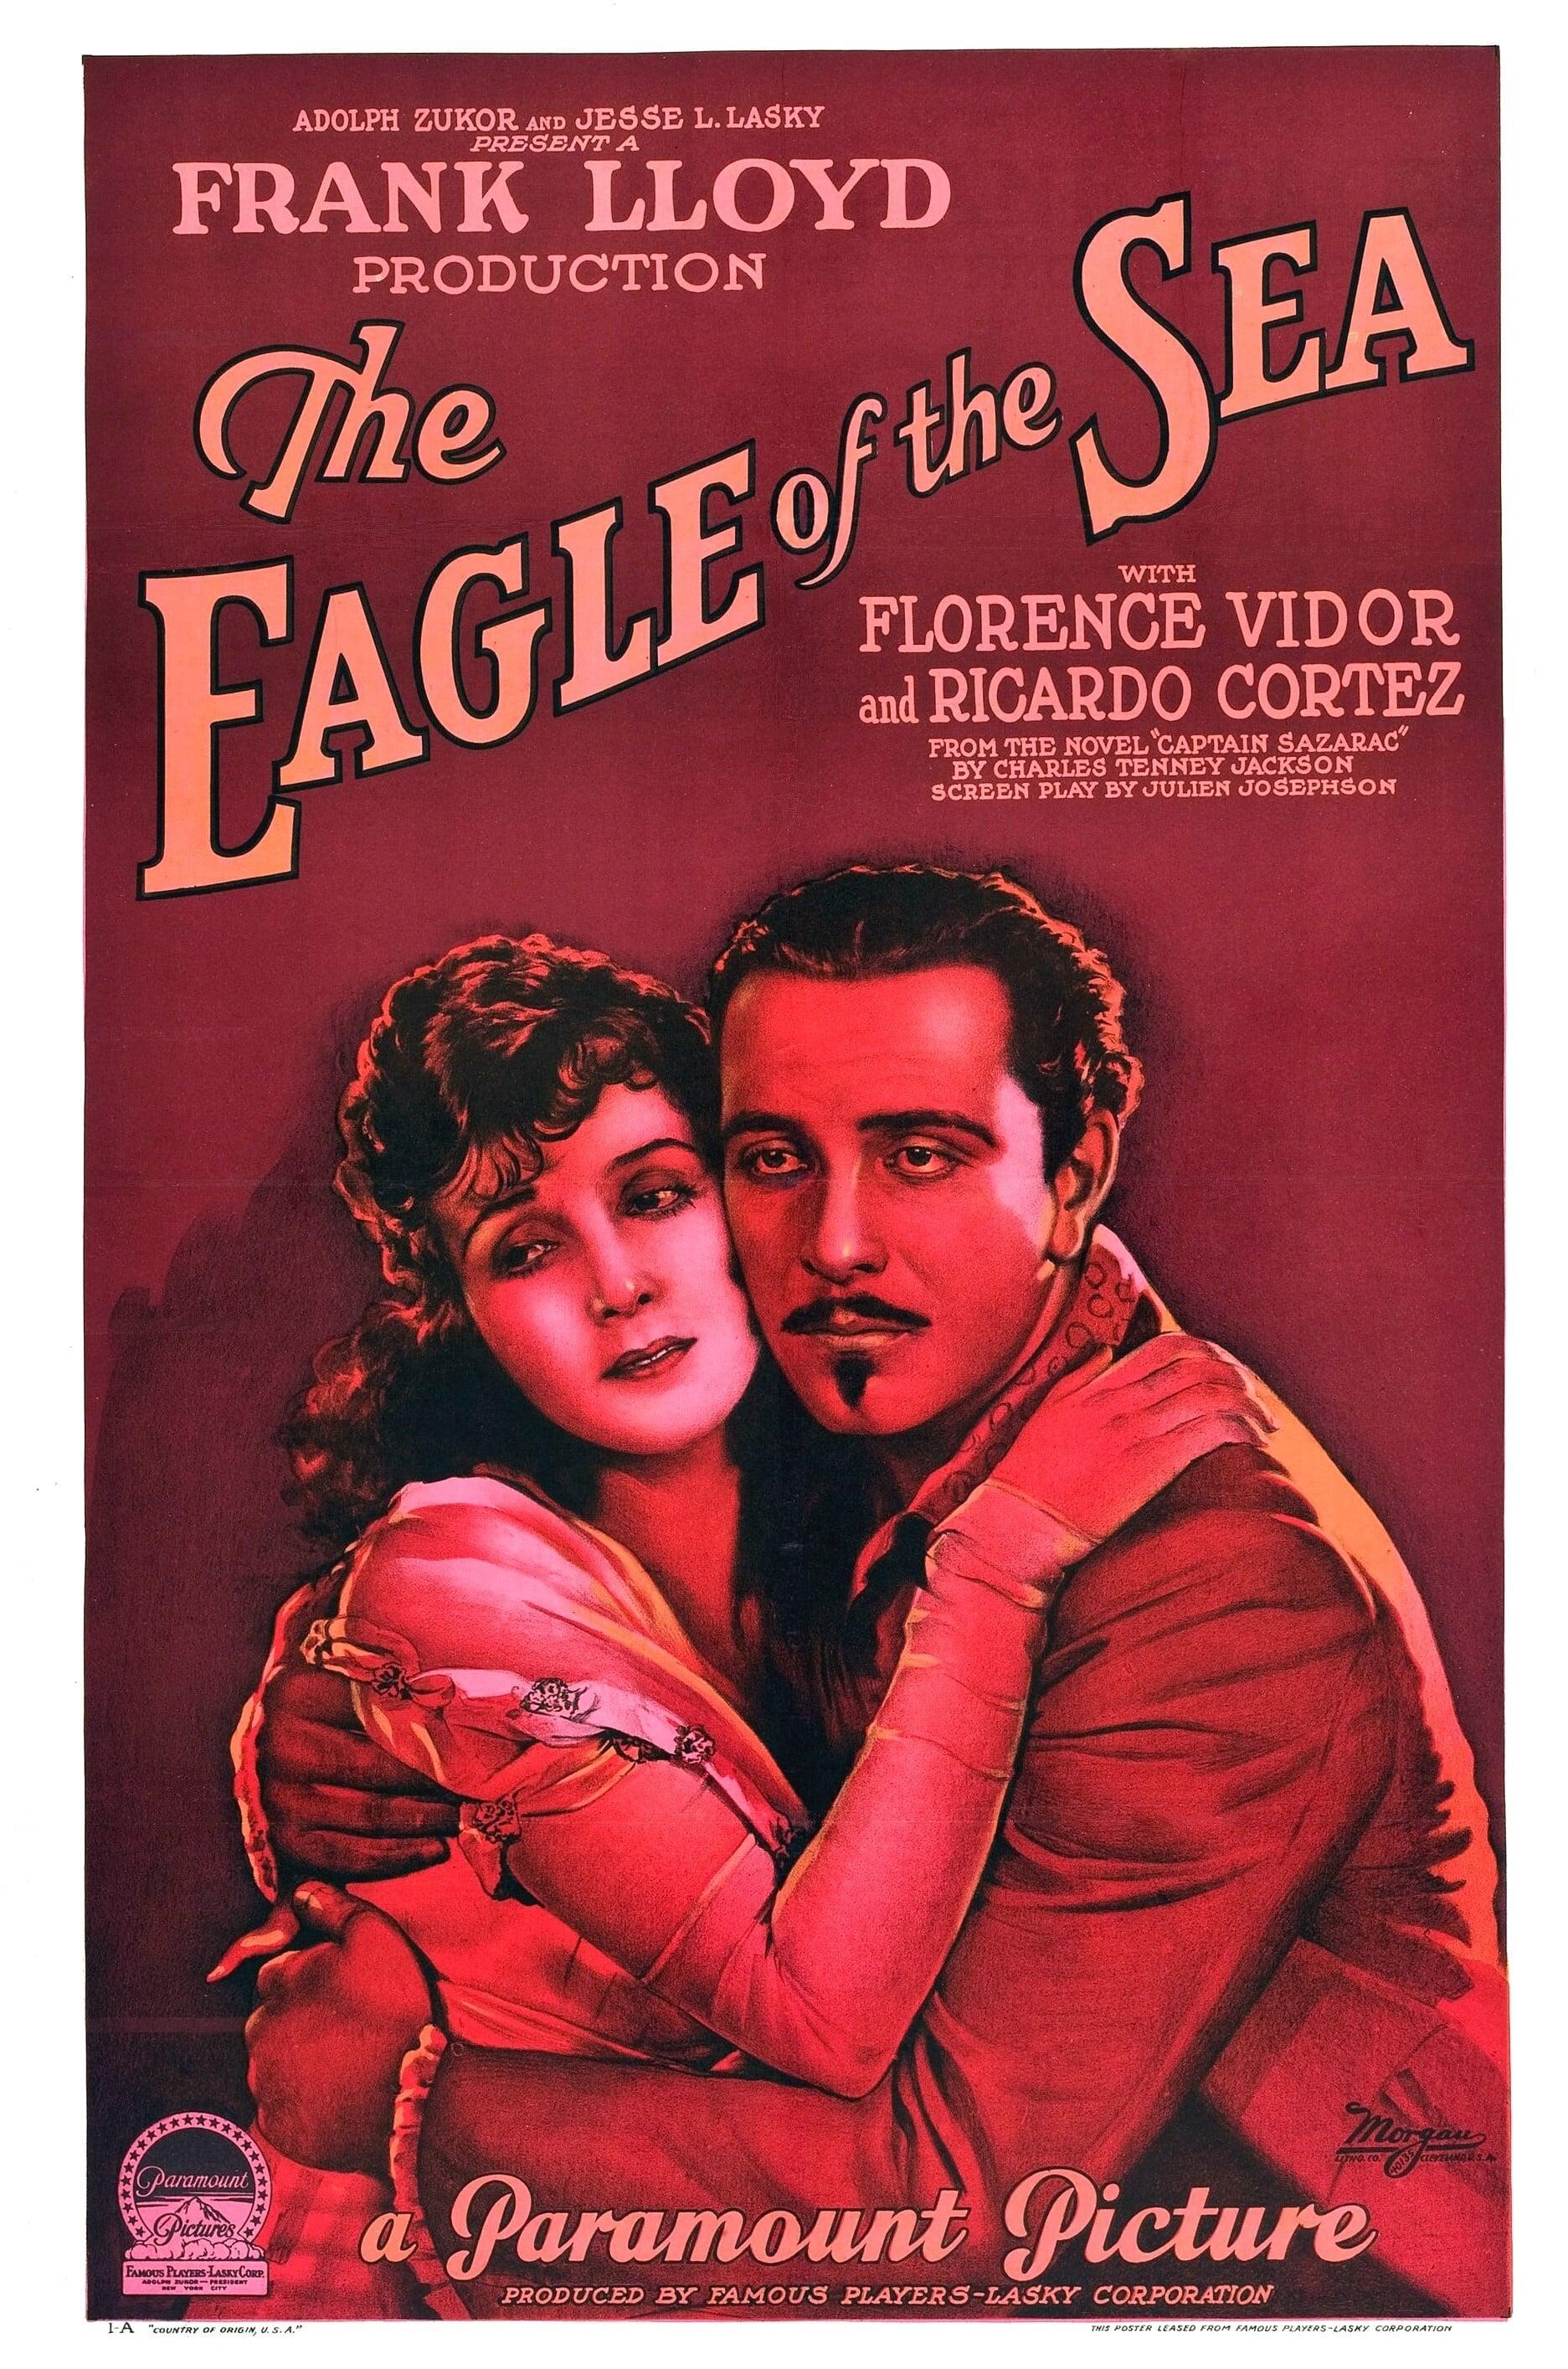 The Eagle of the Sea poster